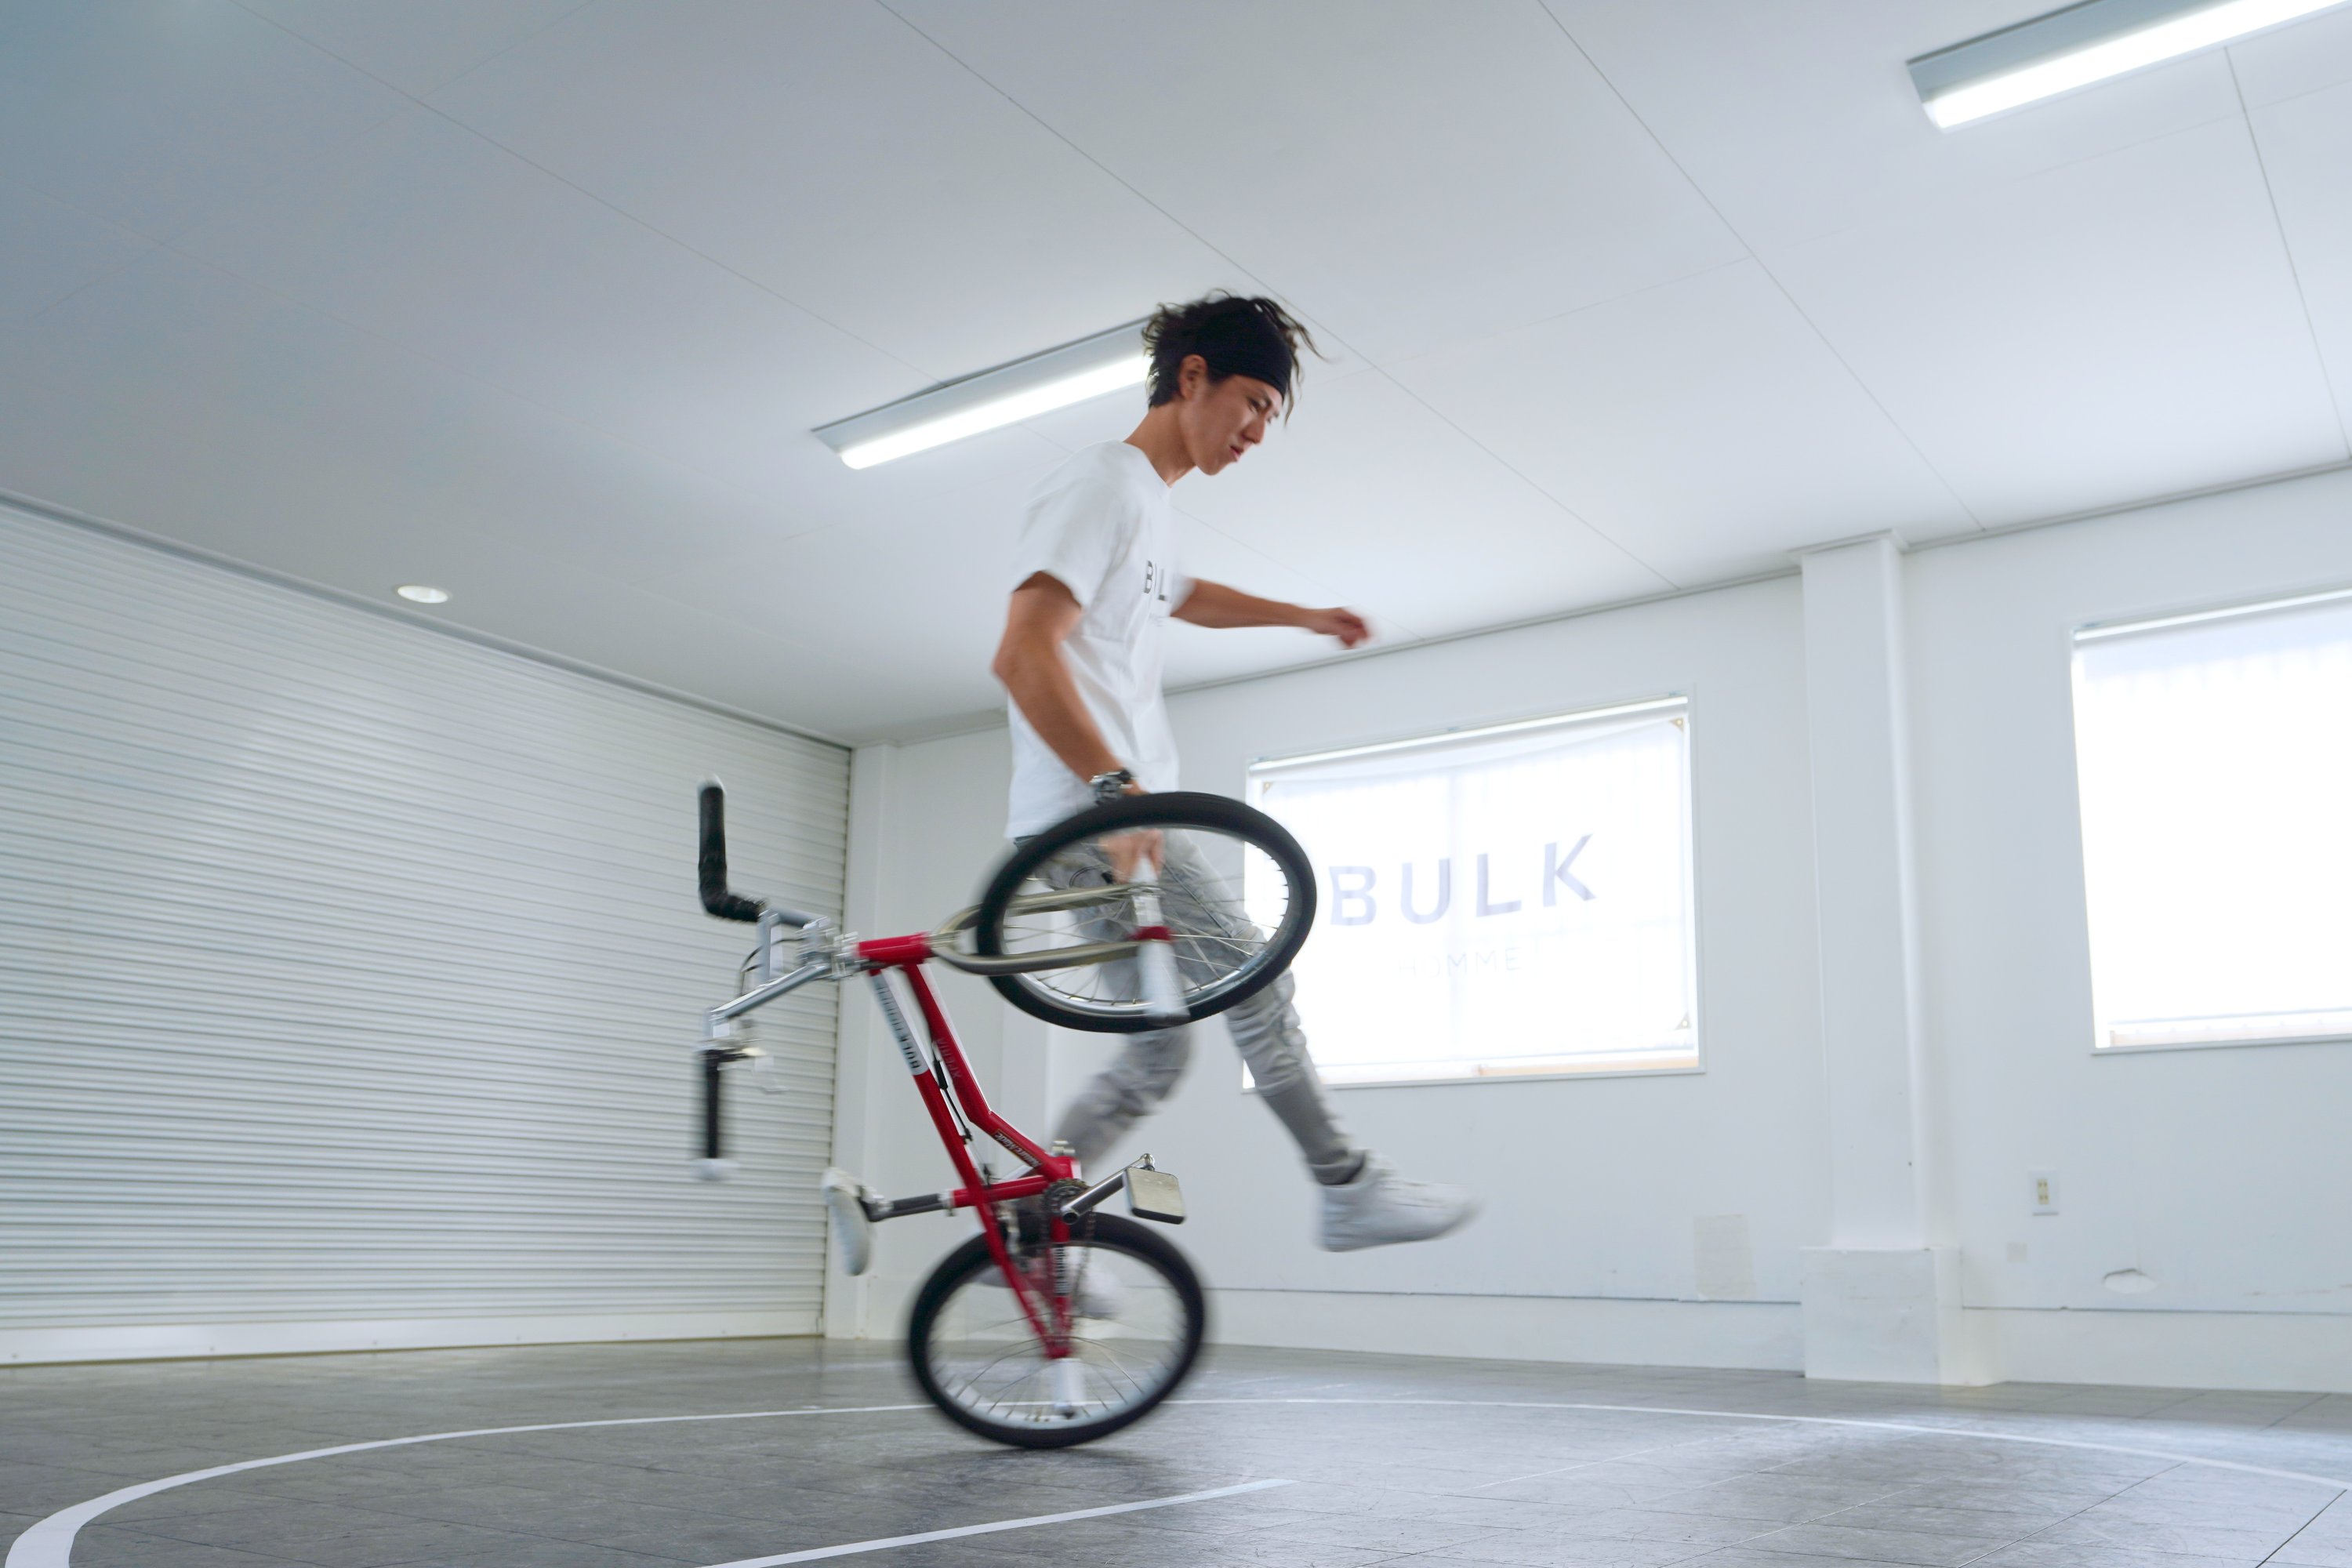 Takahiro Ikeda, 31, breaks the new Guinness World Record for "Most BMX Stick B in 30 seconds" in Chiba, Japan, Oct. 20, 2021. (Courtesy of Guinness World Records 2021/Masakazu Senda via Reuters)